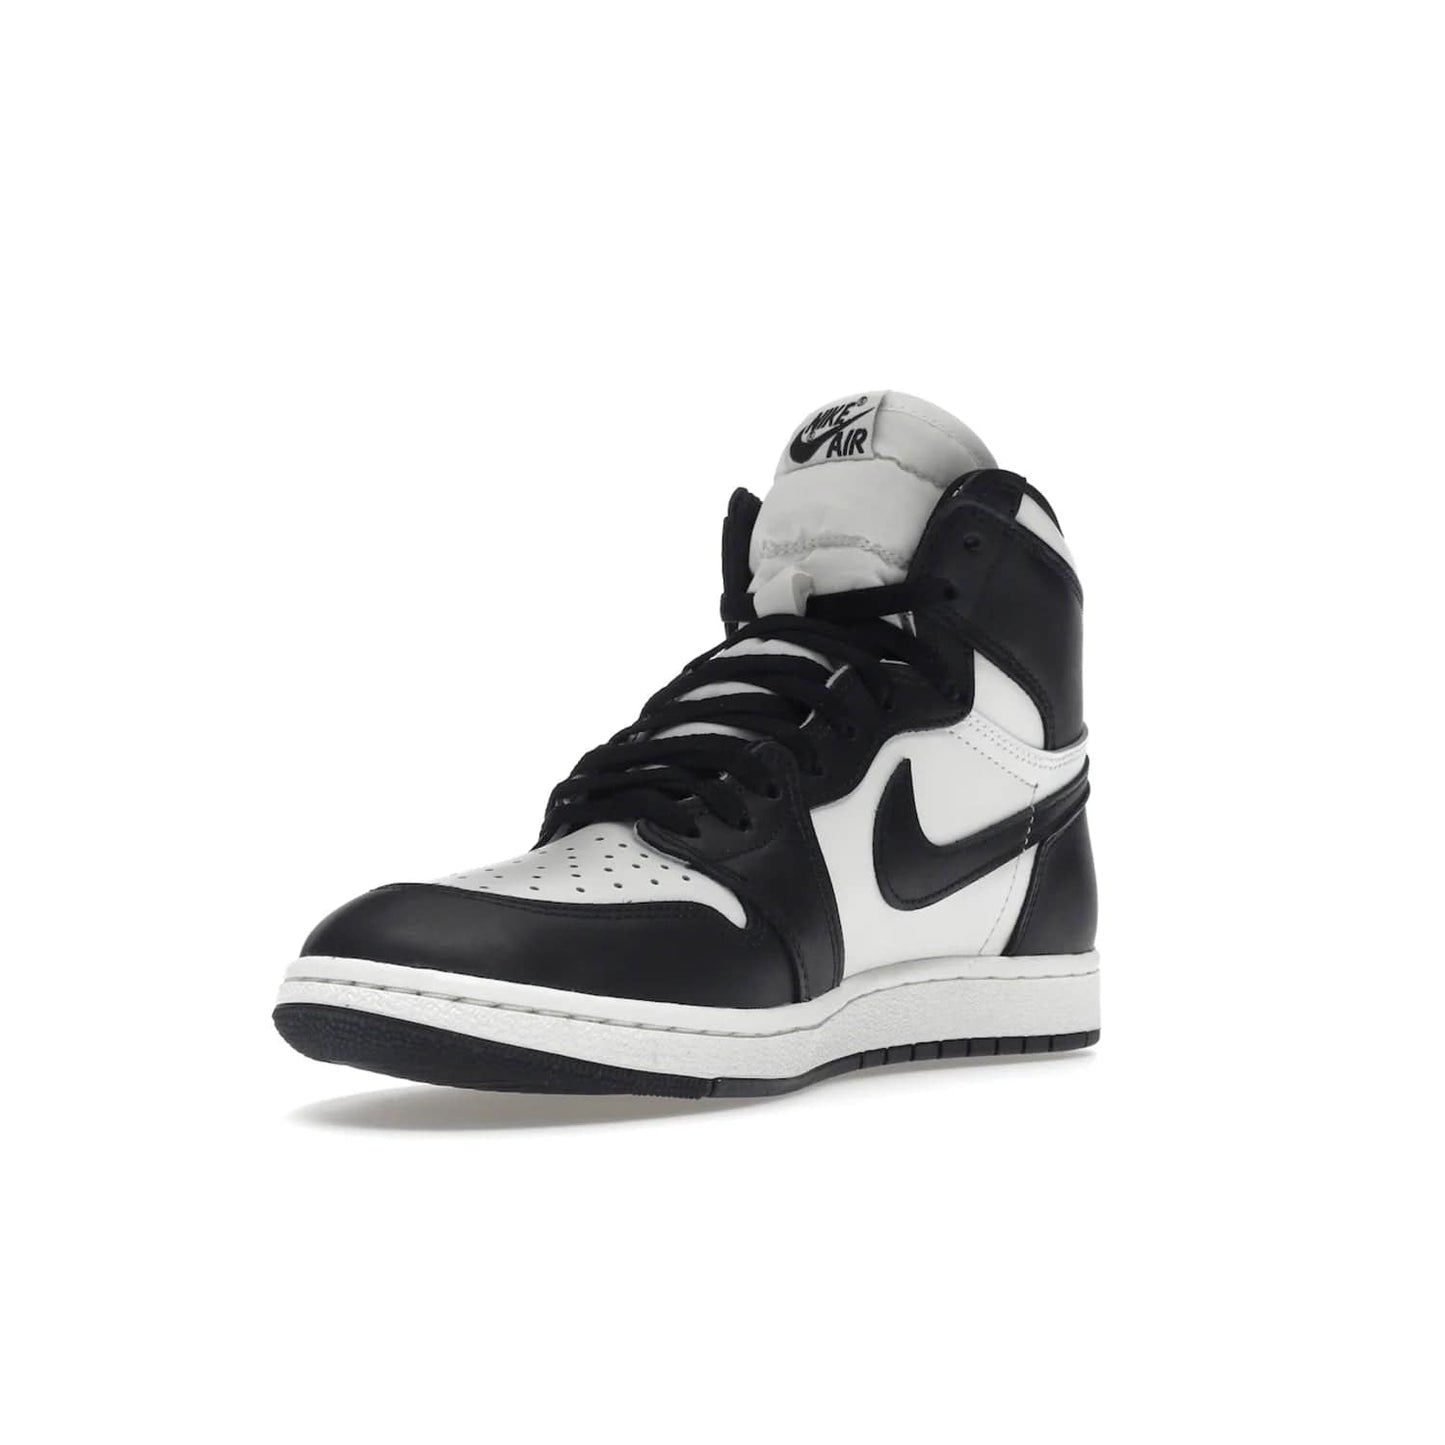 Jordan 1 Retro High 85 Black White (2023) - Image 14 - Only at www.BallersClubKickz.com - Brand new Jordan 1 Retro High 85 Black White (2023) now available. A classic color scheme of black and white leather uppers with signature Nike Air logo on the tongue. Must-have for any Air Jordan fan. Available February 15, 2023.